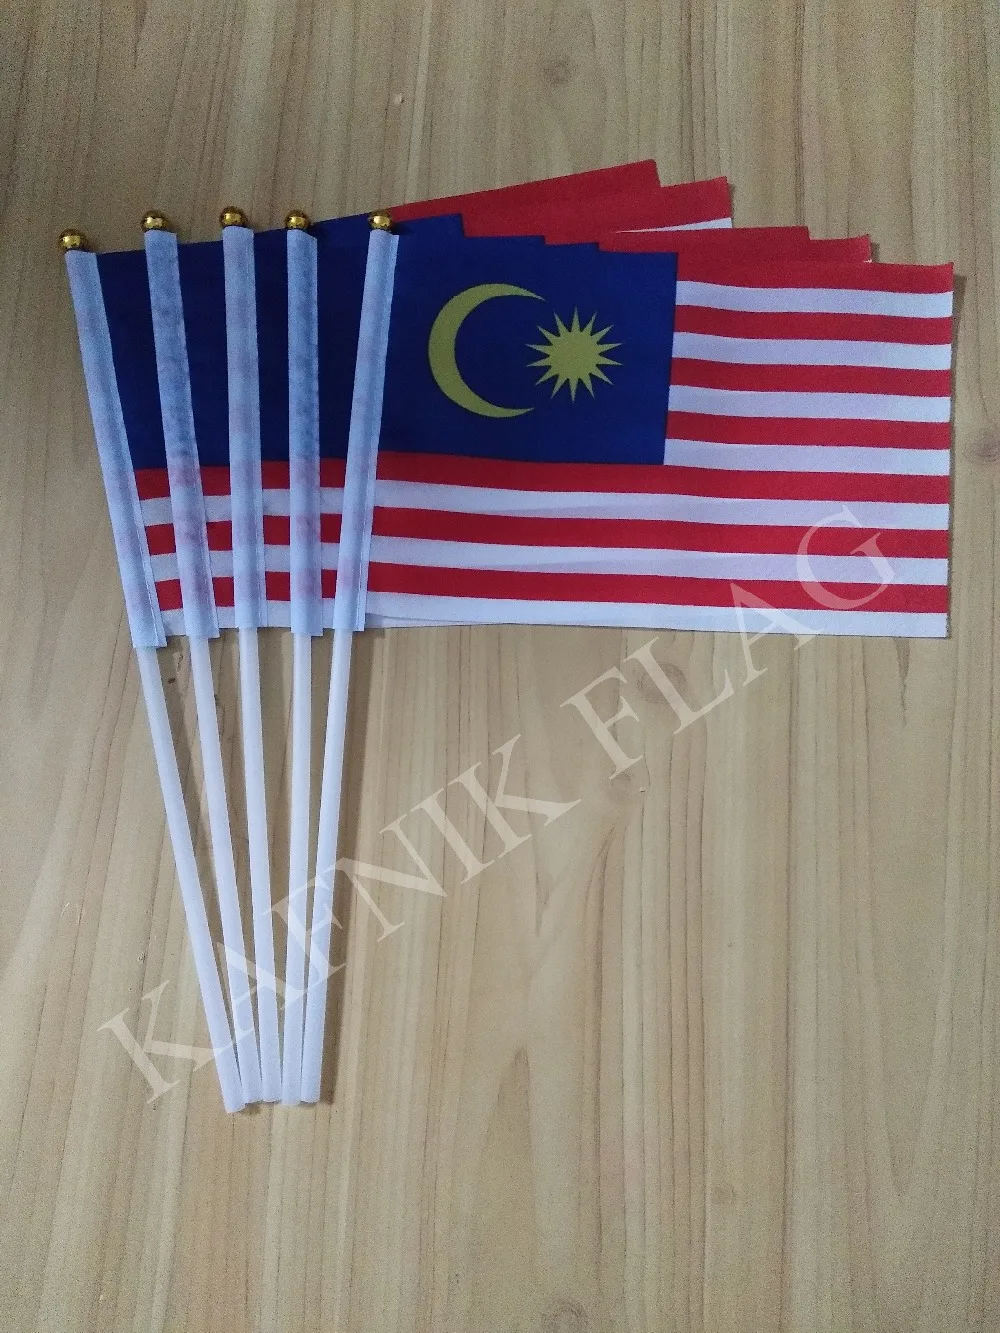 

KAFNIK,5pcs 14*21cm Malaysia Fabric Flags National hand Flag with Pole for advertisement decoration, free shipping